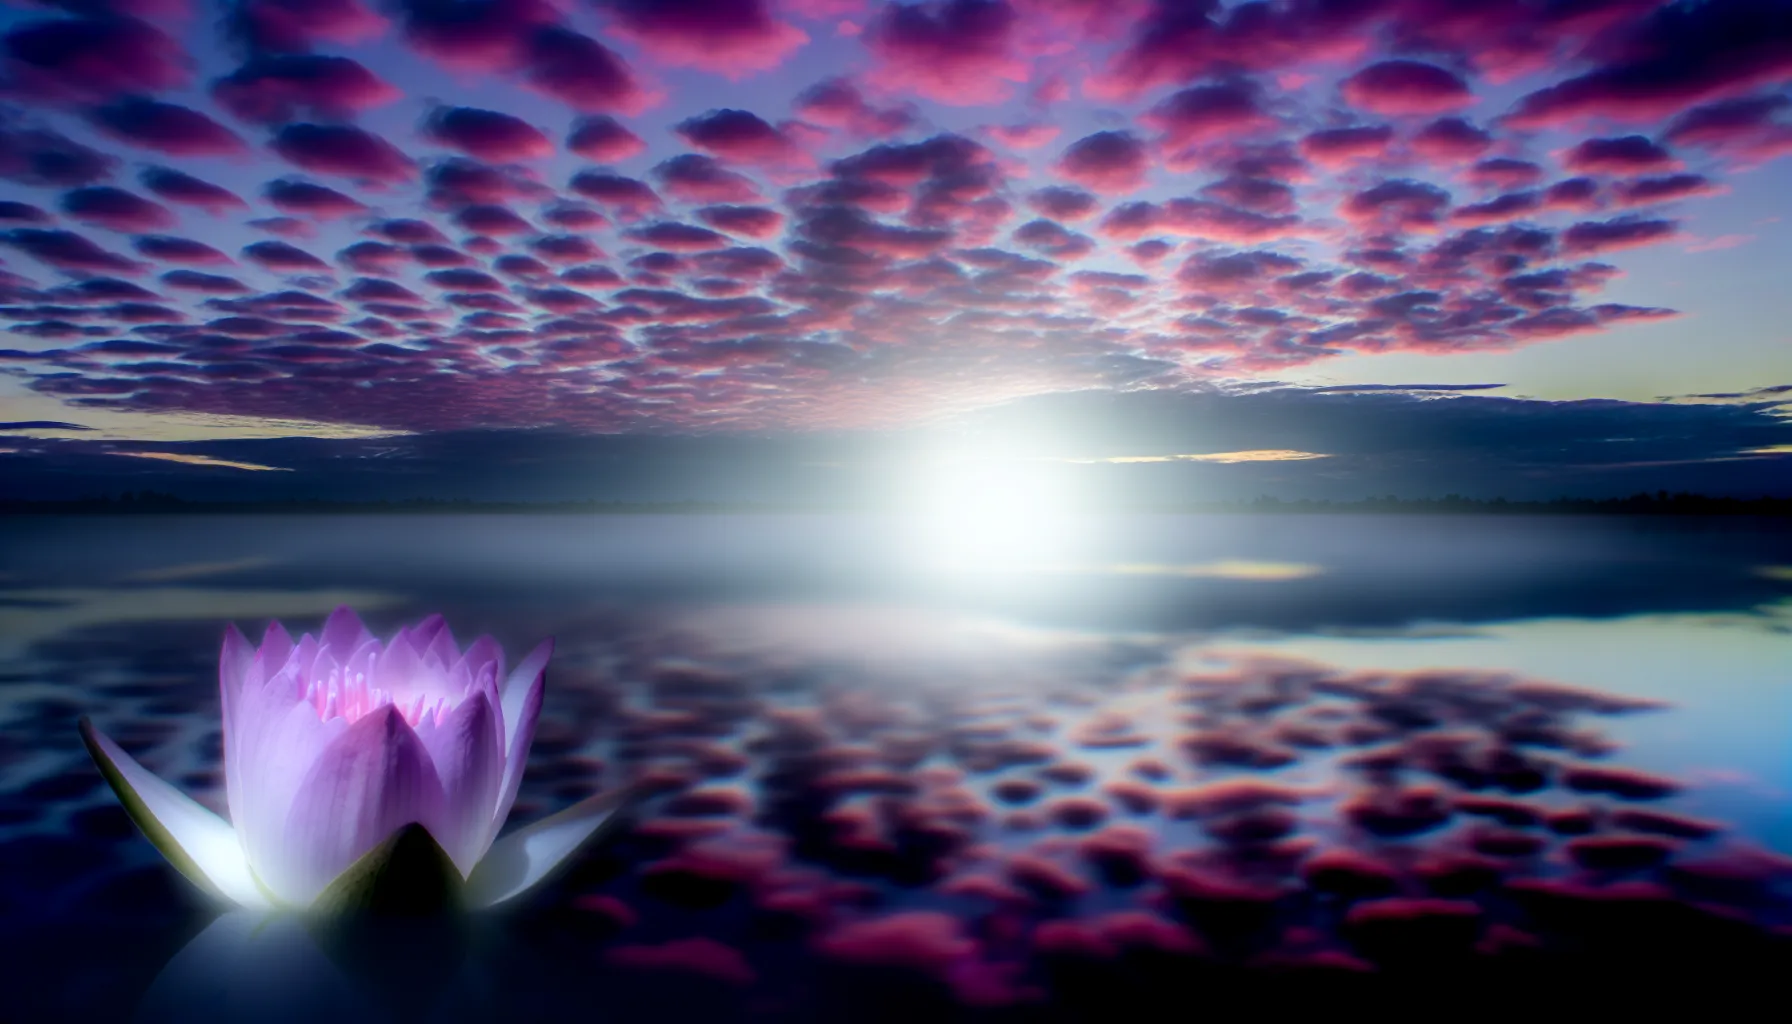 <strong>As the dawn whispers promises of new beginnings, the lotus flower emerges in solitude</strong>, a delicate emblem of the heart's capacity to heal and flourish anew amidst the tranquil waters of self-acceptance.